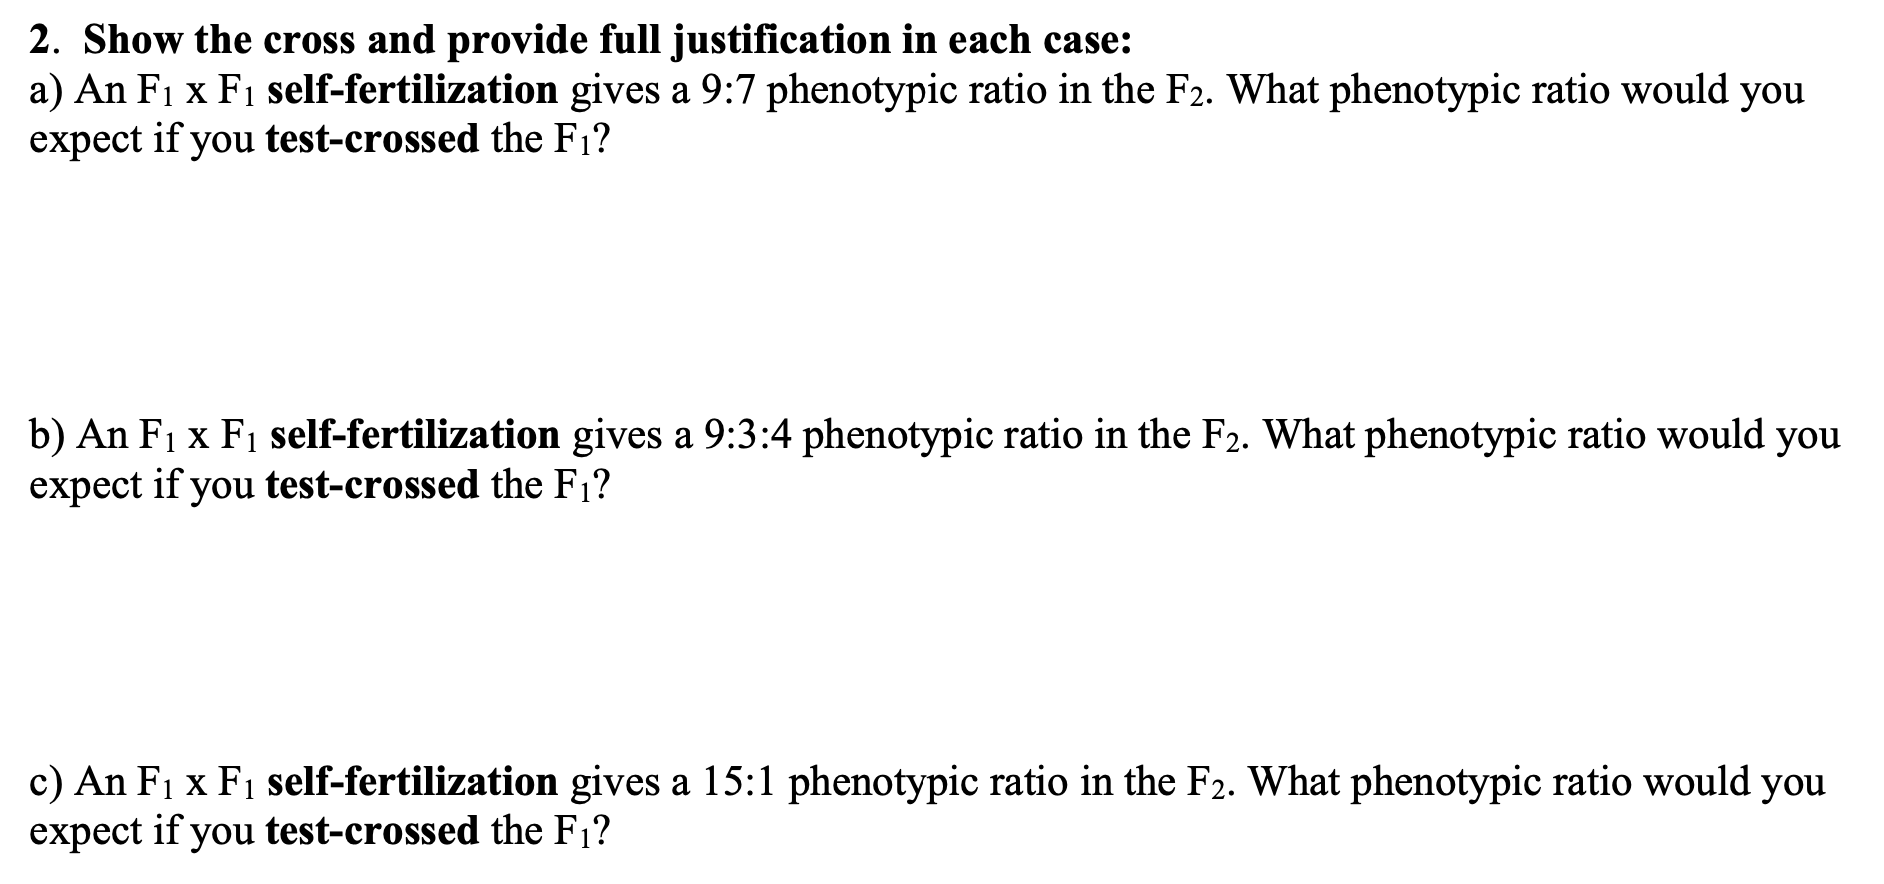 2. Show the cross and provide full justification in each case:
a) An F1 x F1 self-fertilization gives a 9:7 phenotypic ratio in the F2. What phenotypic ratio would you
expect if you test-crossed the F1?
b) An F1 x F1 self-fertilization gives a 9:3:4 phenotypic ratio in the F2. What phenotypic ratio would you
expect if you test-crossed the F1?
c) An F1 x F1 self-fertilization gives a 15:1 phenotypic ratio in the F2. What phenotypic ratio would you
expect if you test-crossed the F1?
